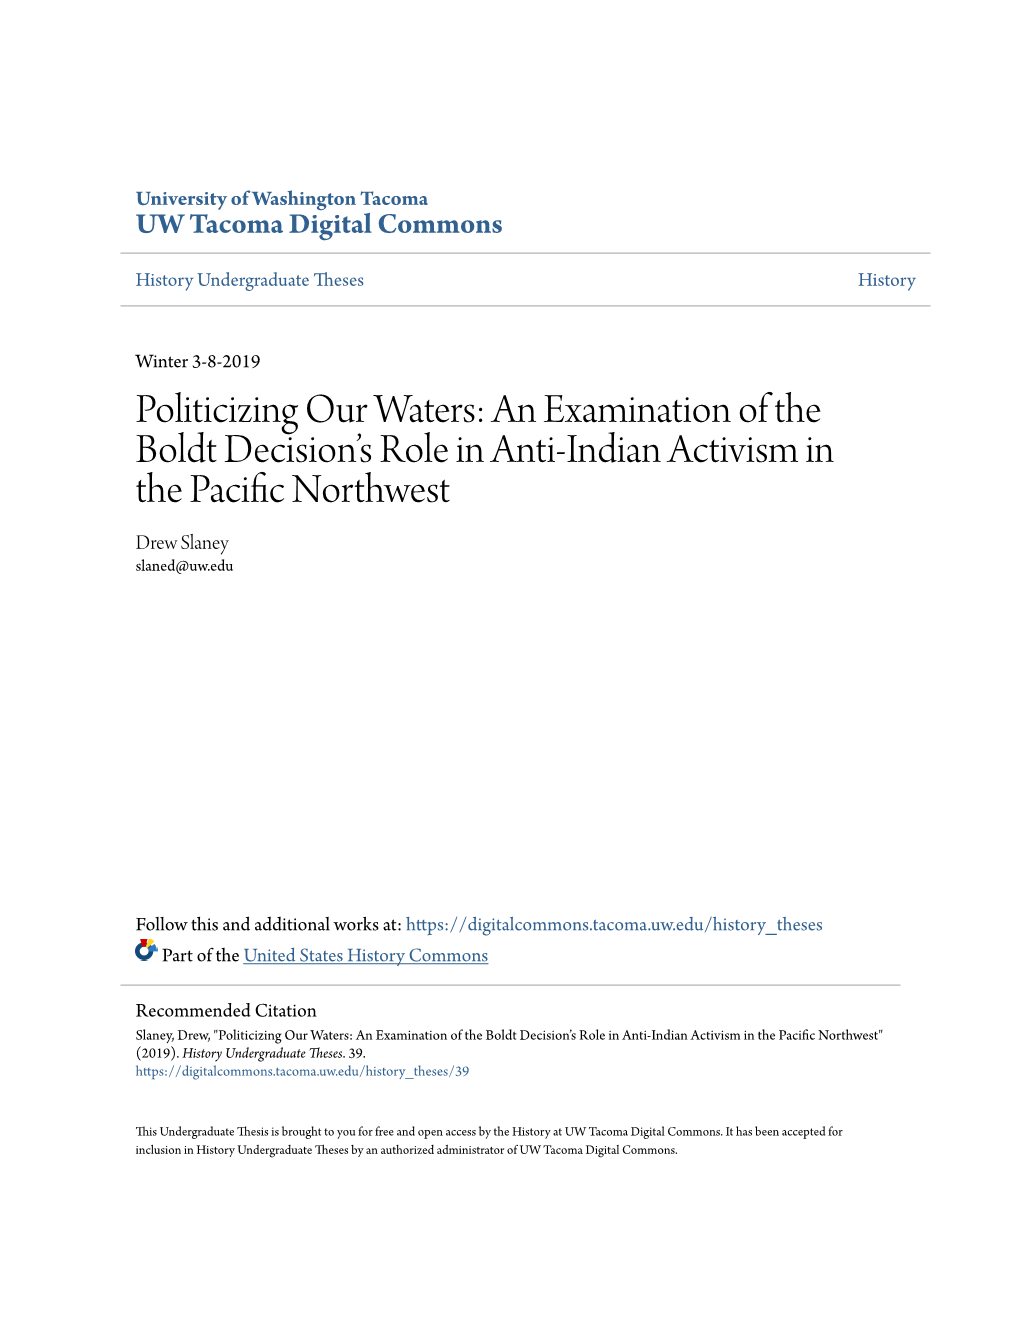 An Examination of the Boldt Decision's Role in Anti-Indian Activism in The